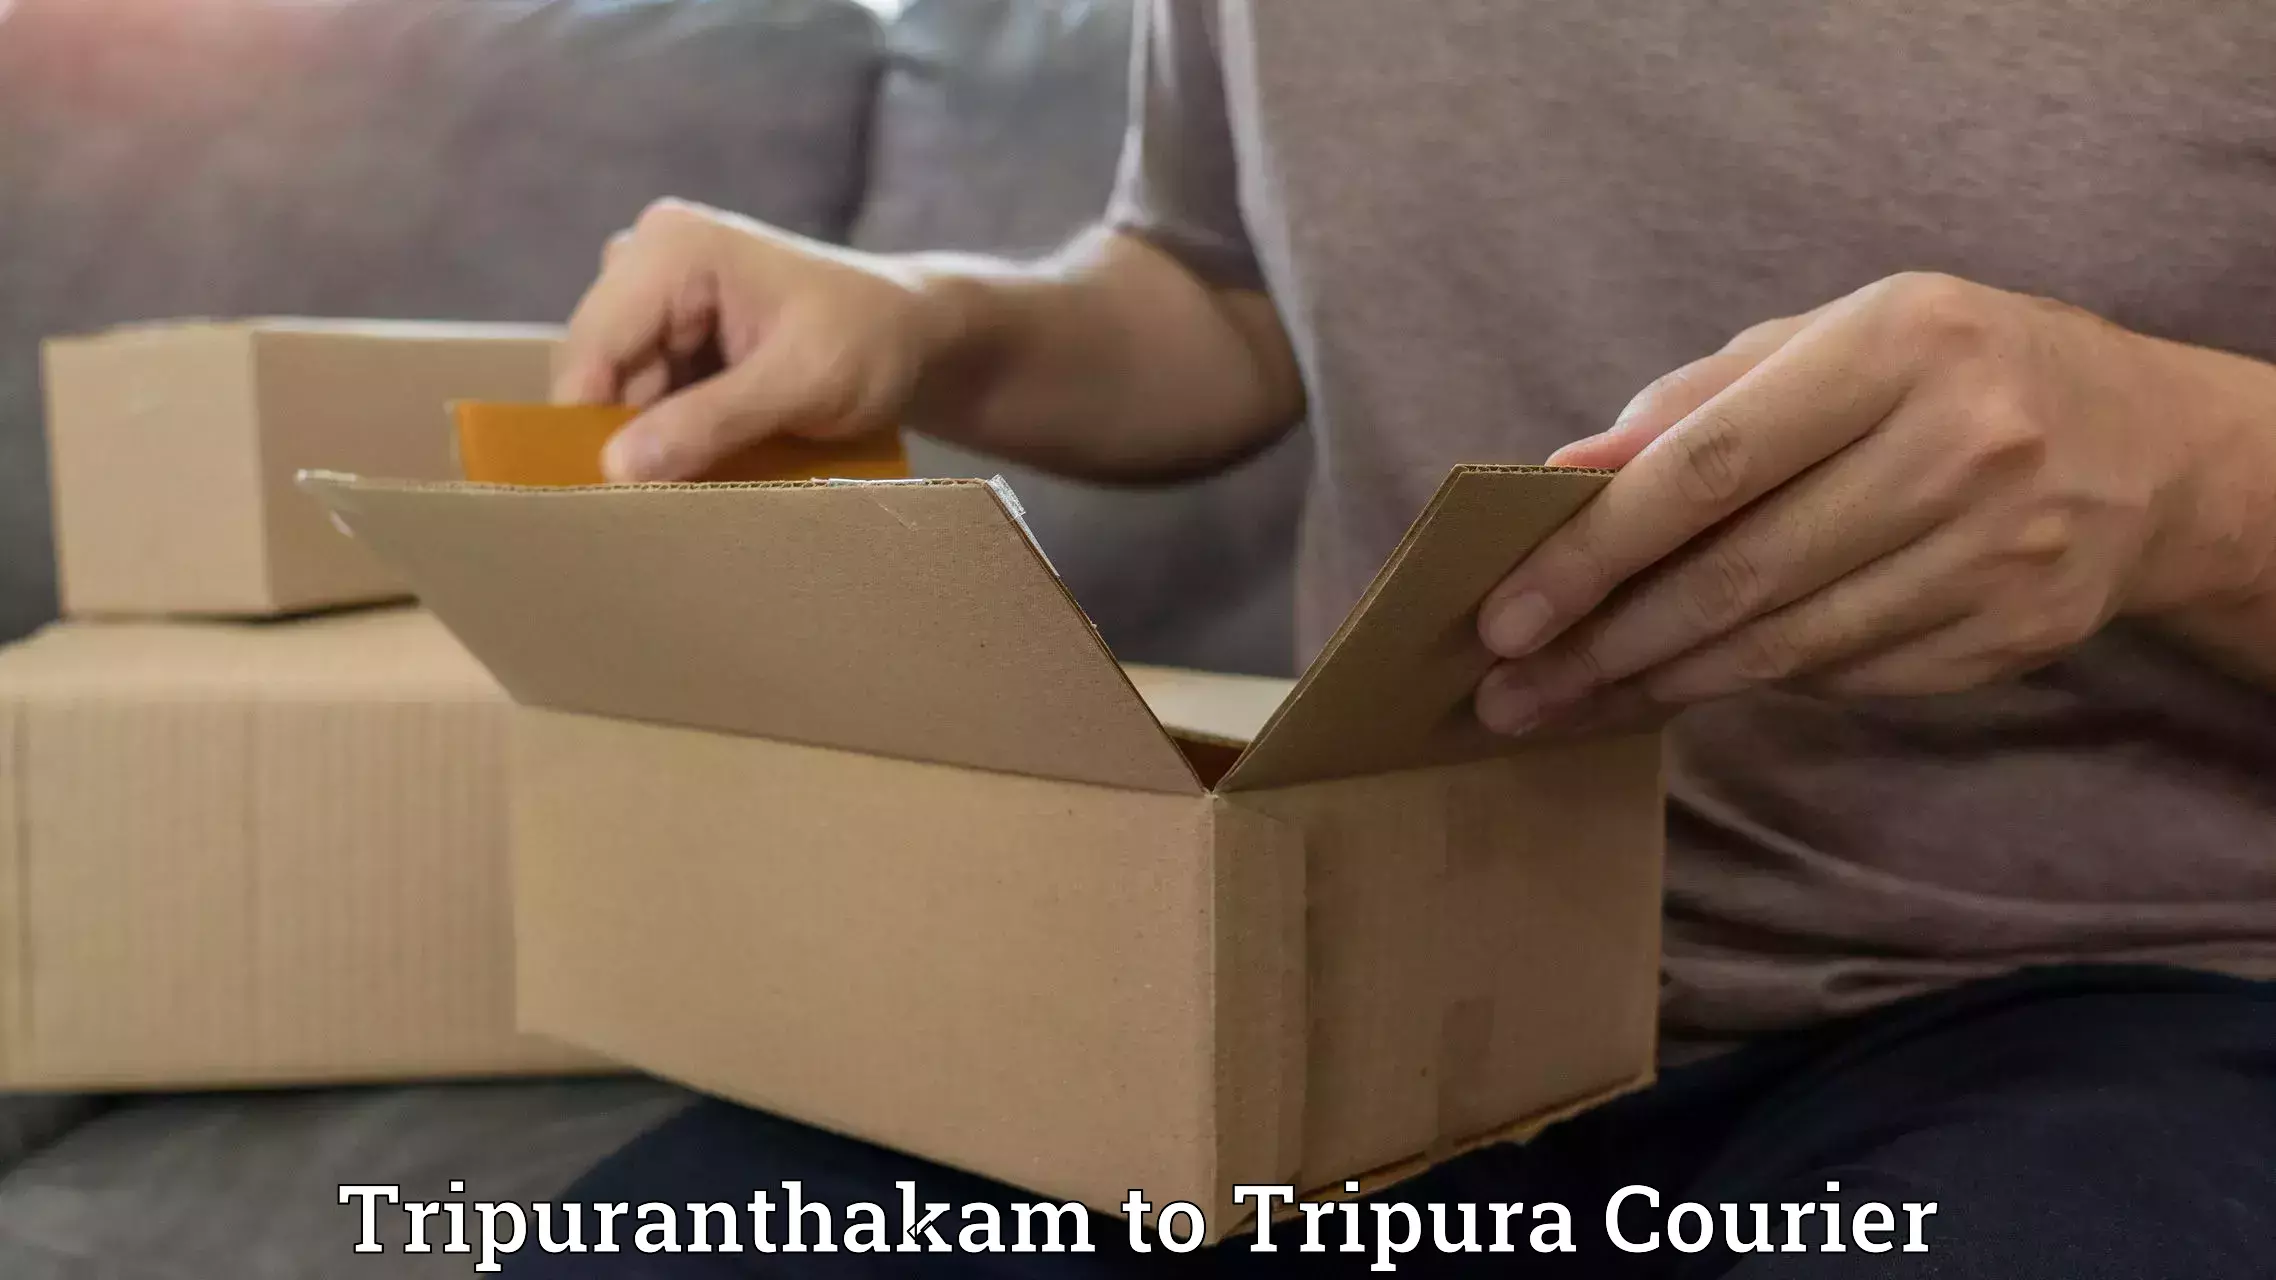 State-of-the-art courier technology Tripuranthakam to South Tripura